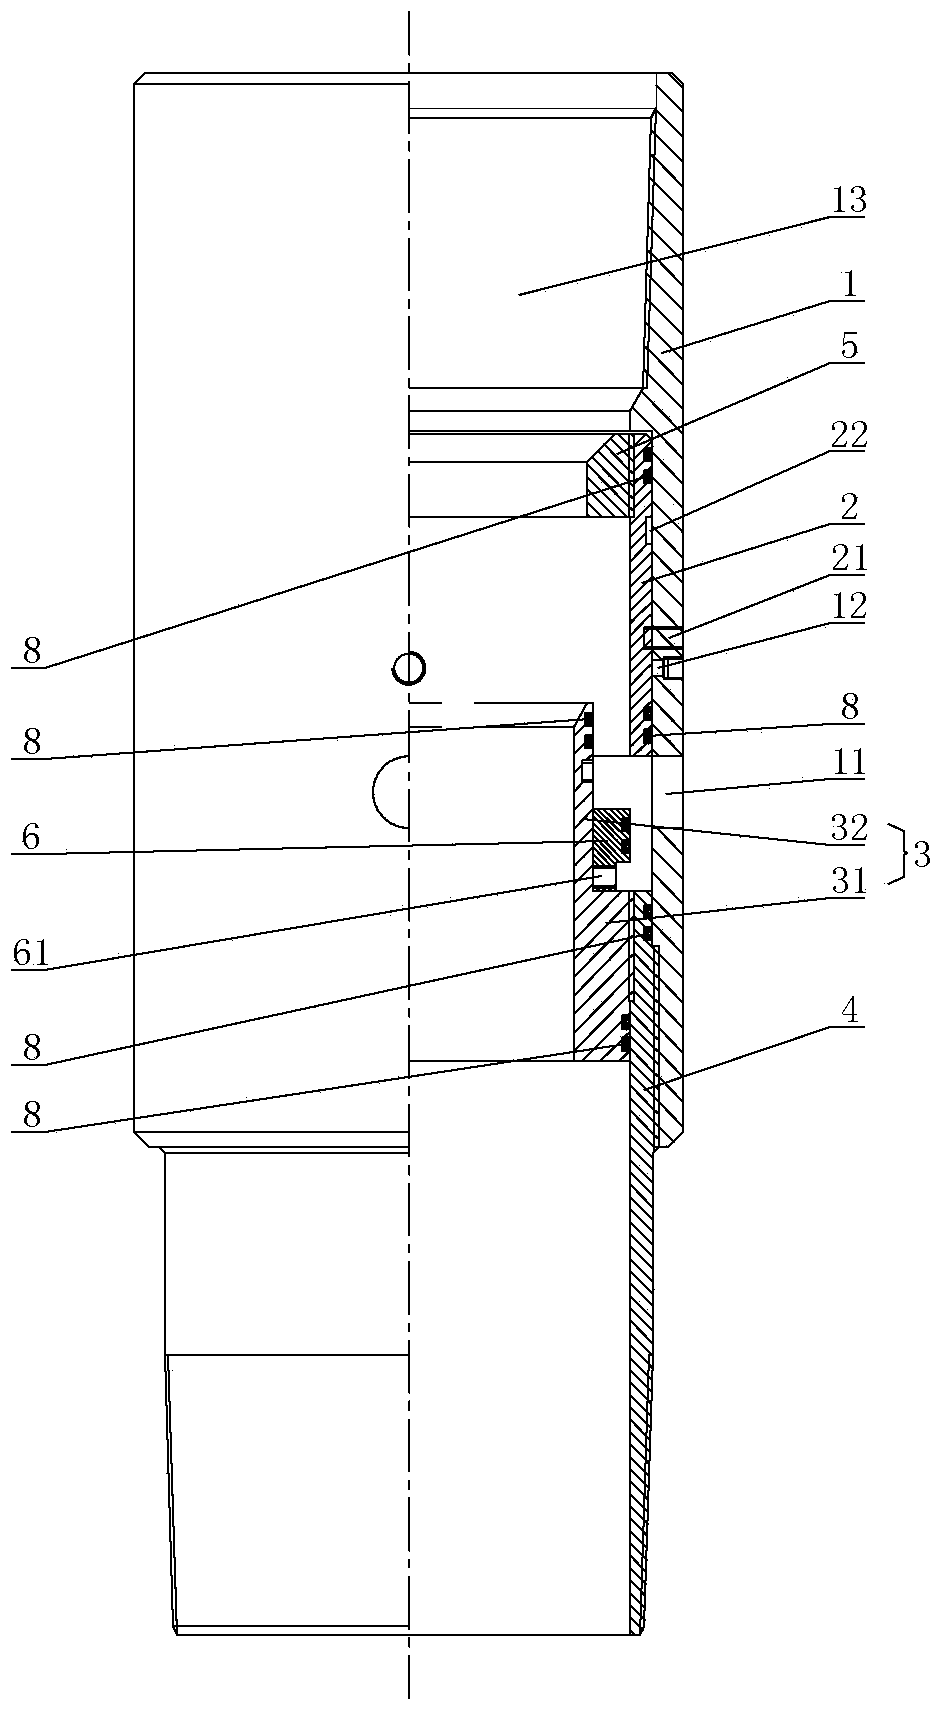 Grading cement pouring device